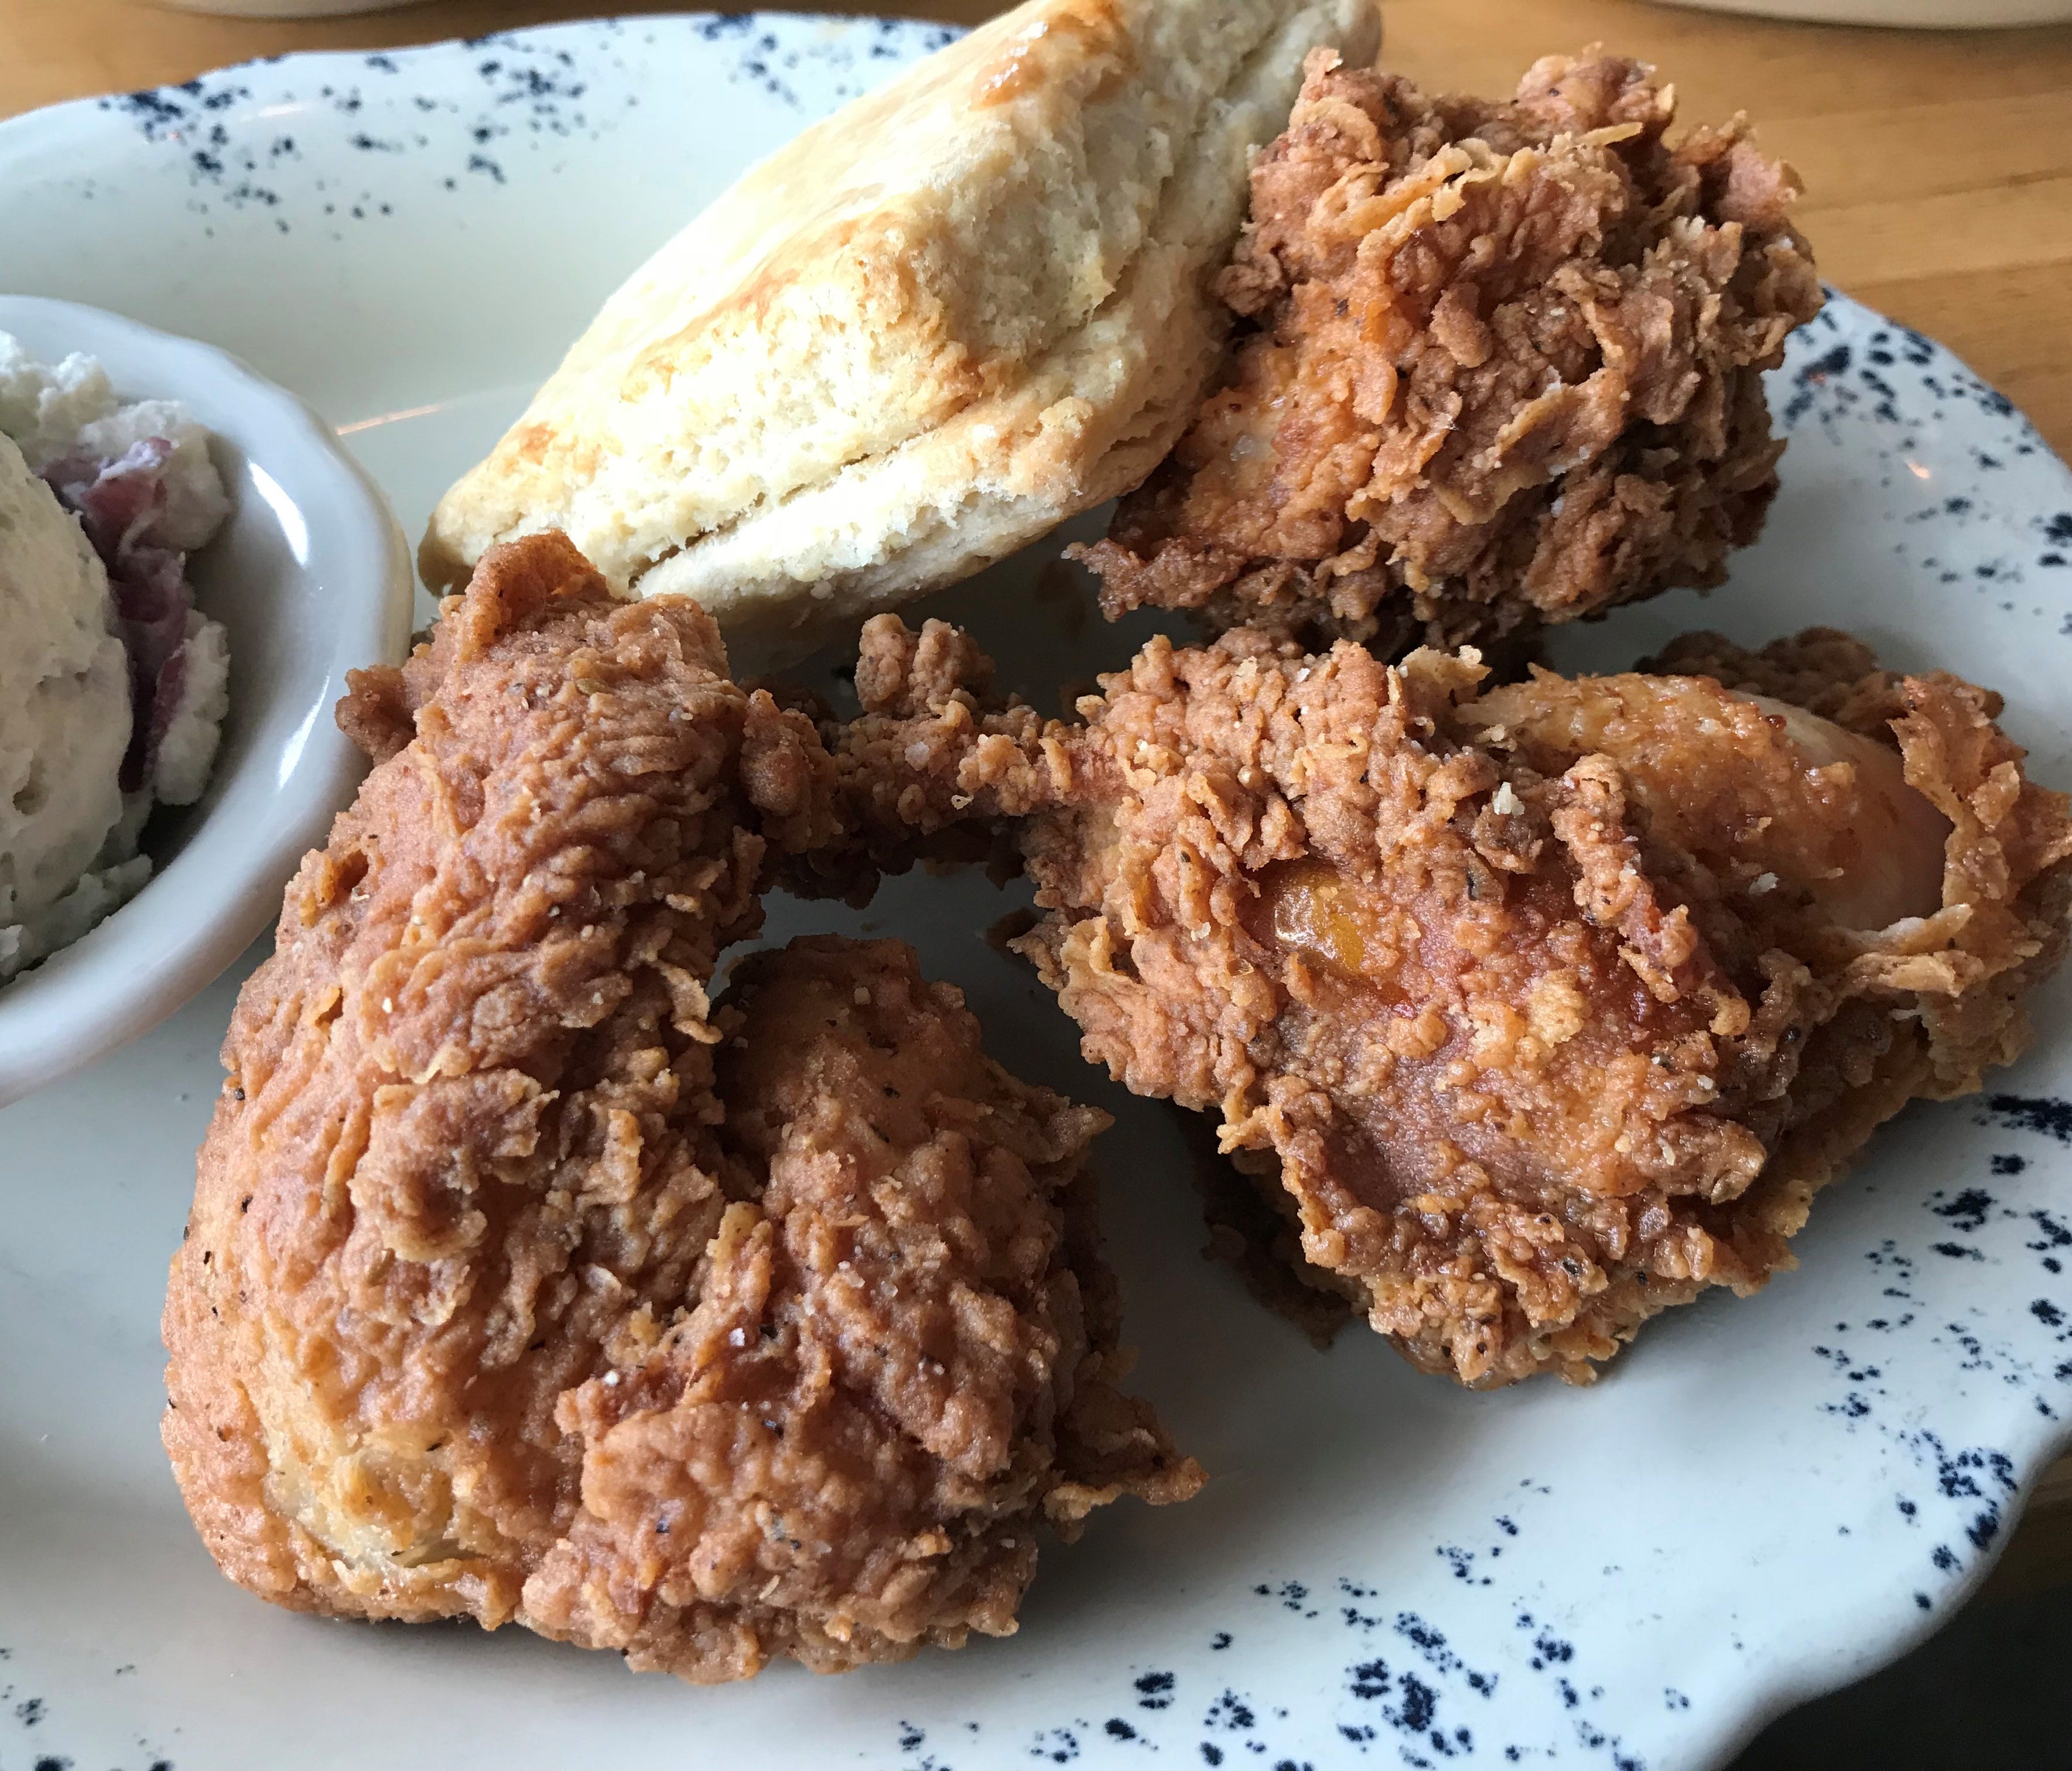 A close-up of the delicious, crispy, craggy coating on the fried chicken at Whistle Britches.